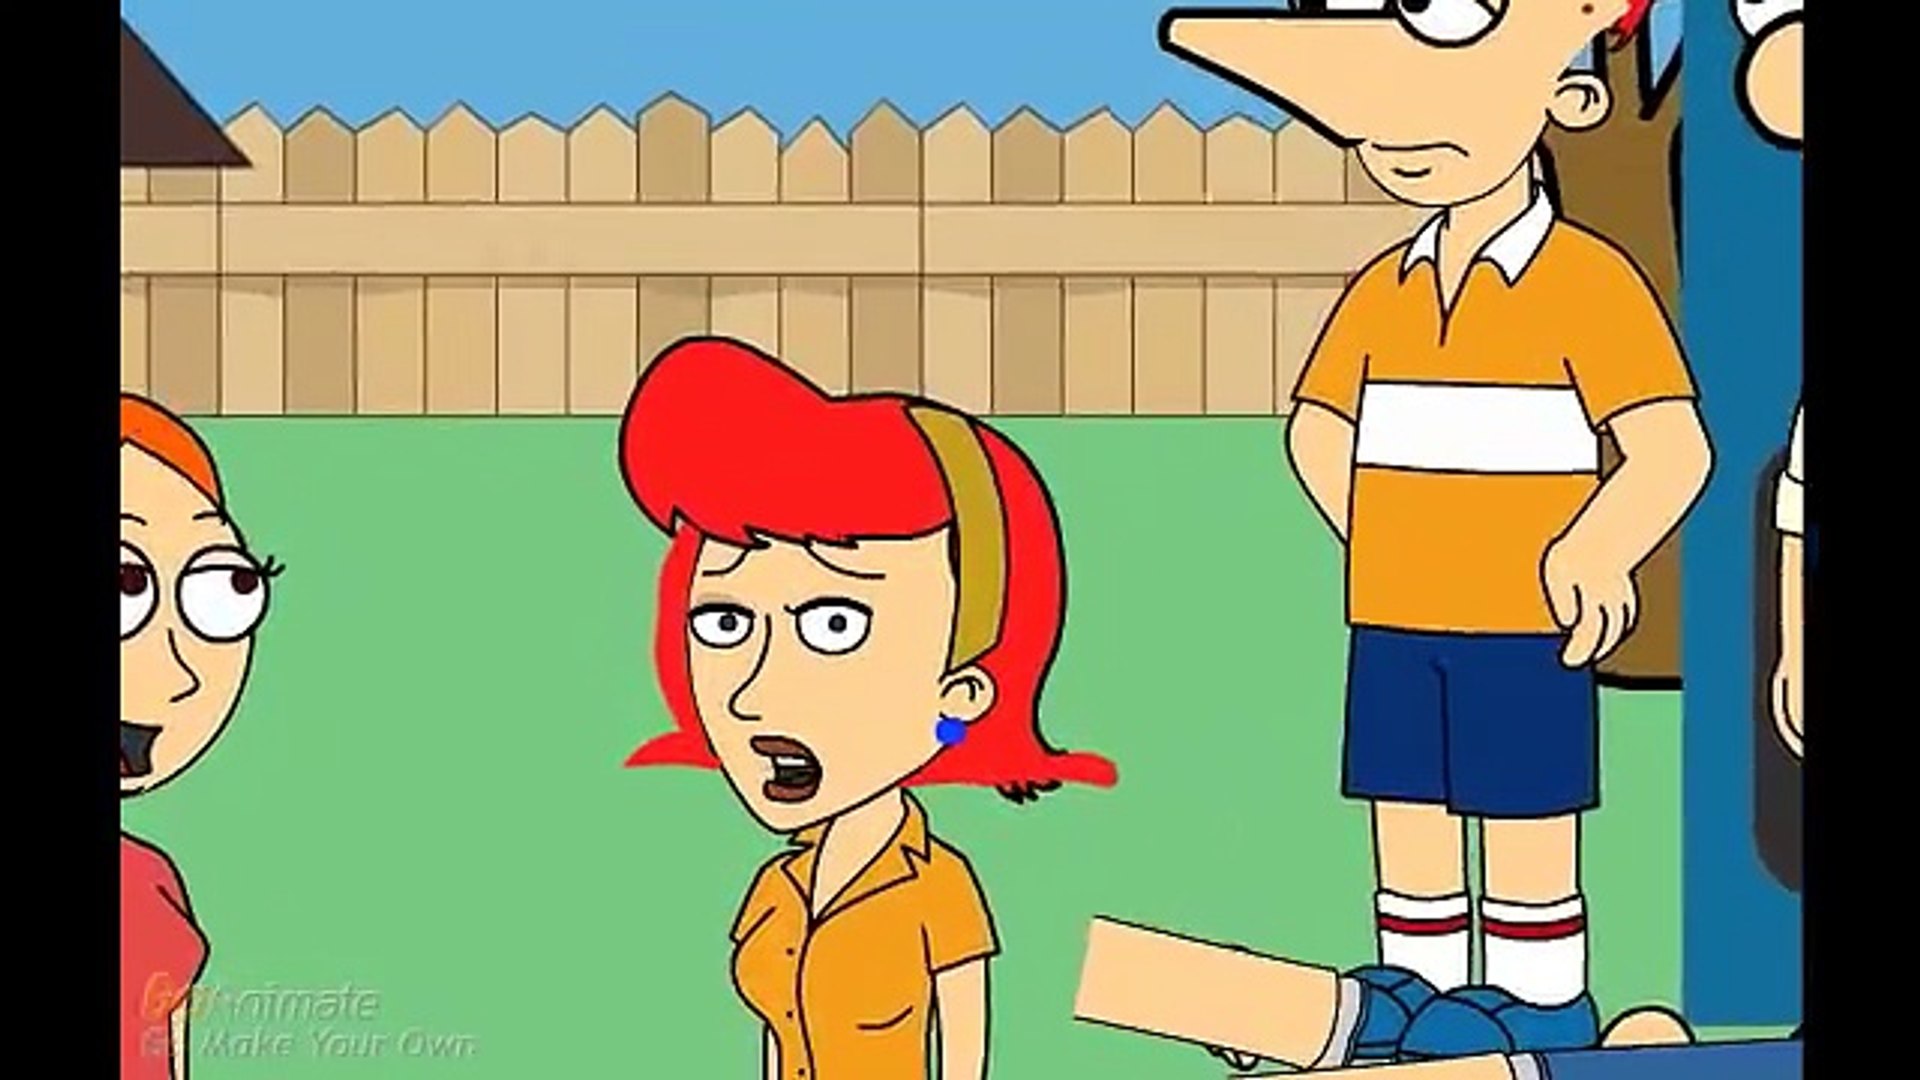 Phineas and Ferb build a Windseeker and get Busted